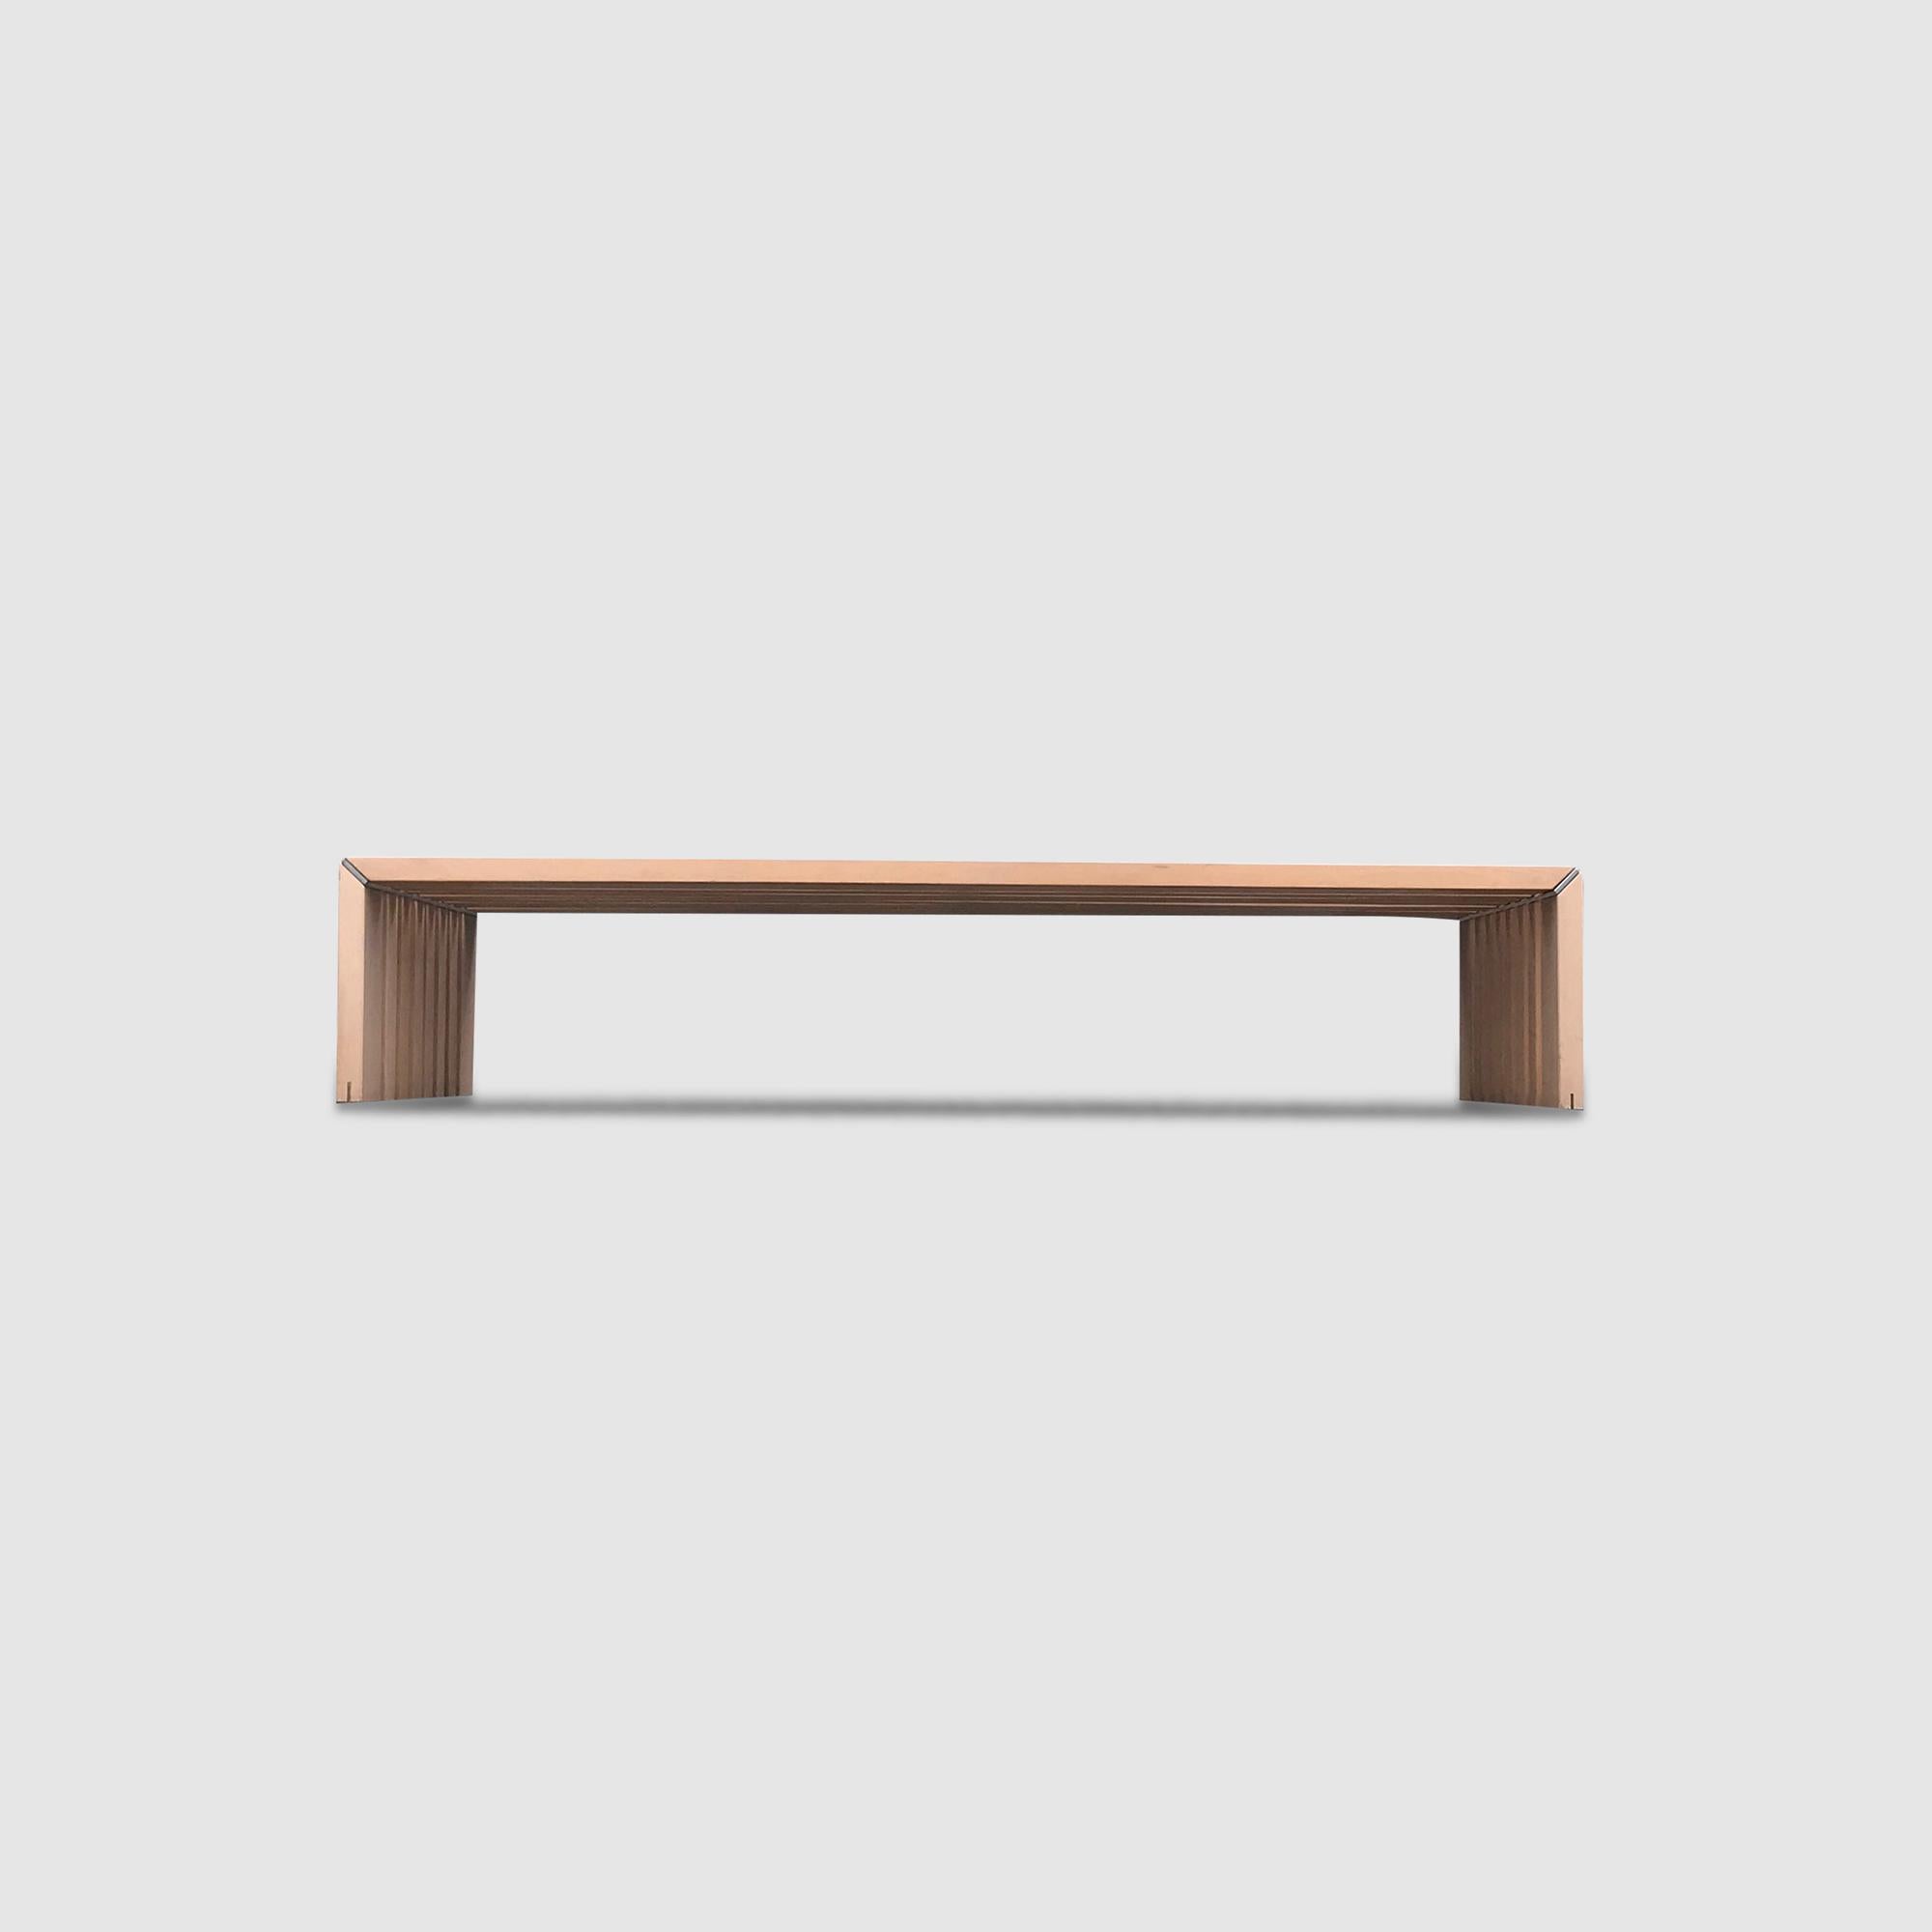 Minimalist Passe Partout slatted ash bench by Walter Antonis for Arspect 1970s For Sale